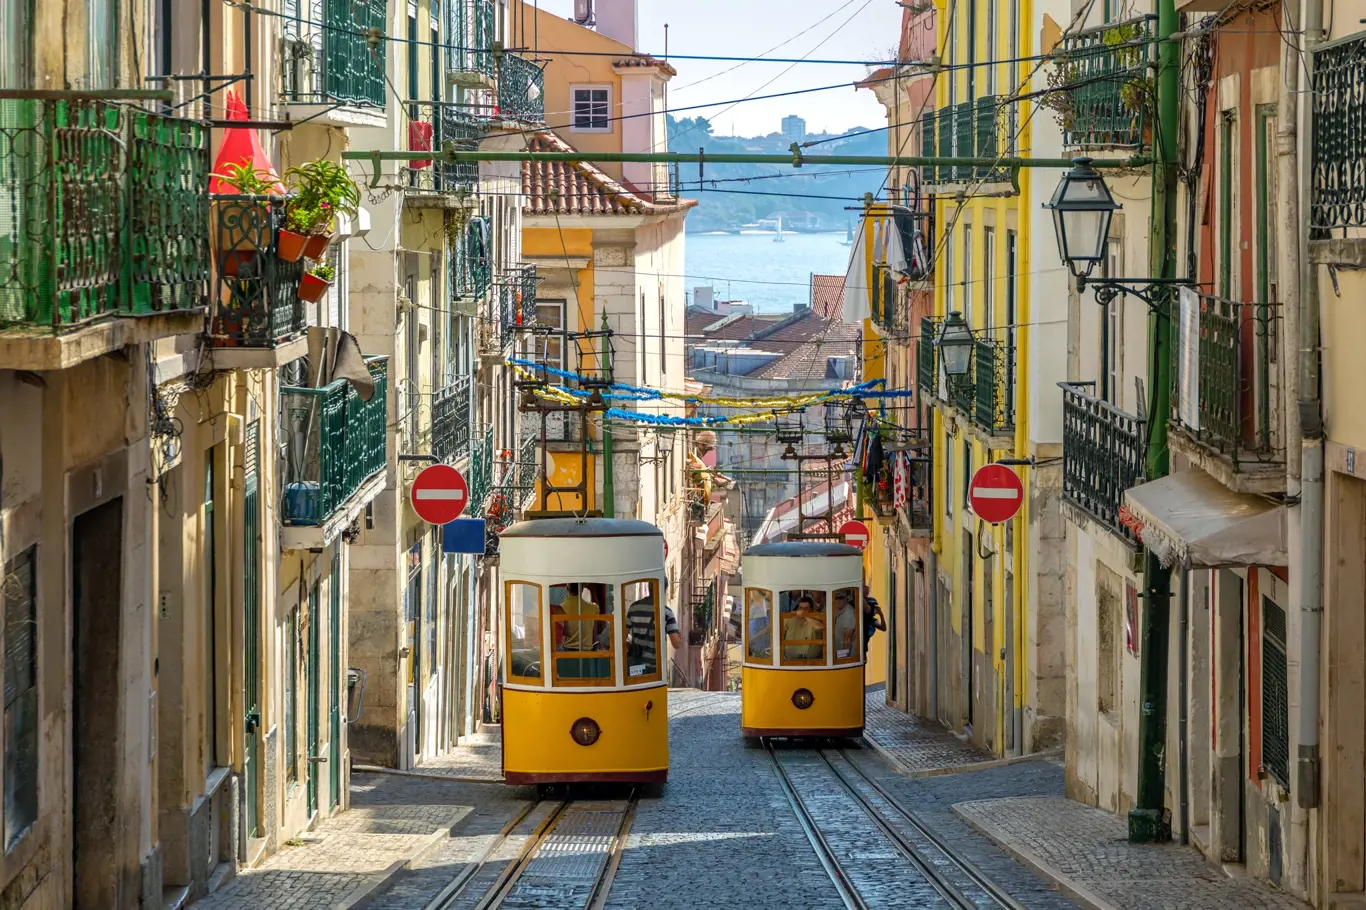 The Gloria Funicular in the city center of Lisbon, Portugal